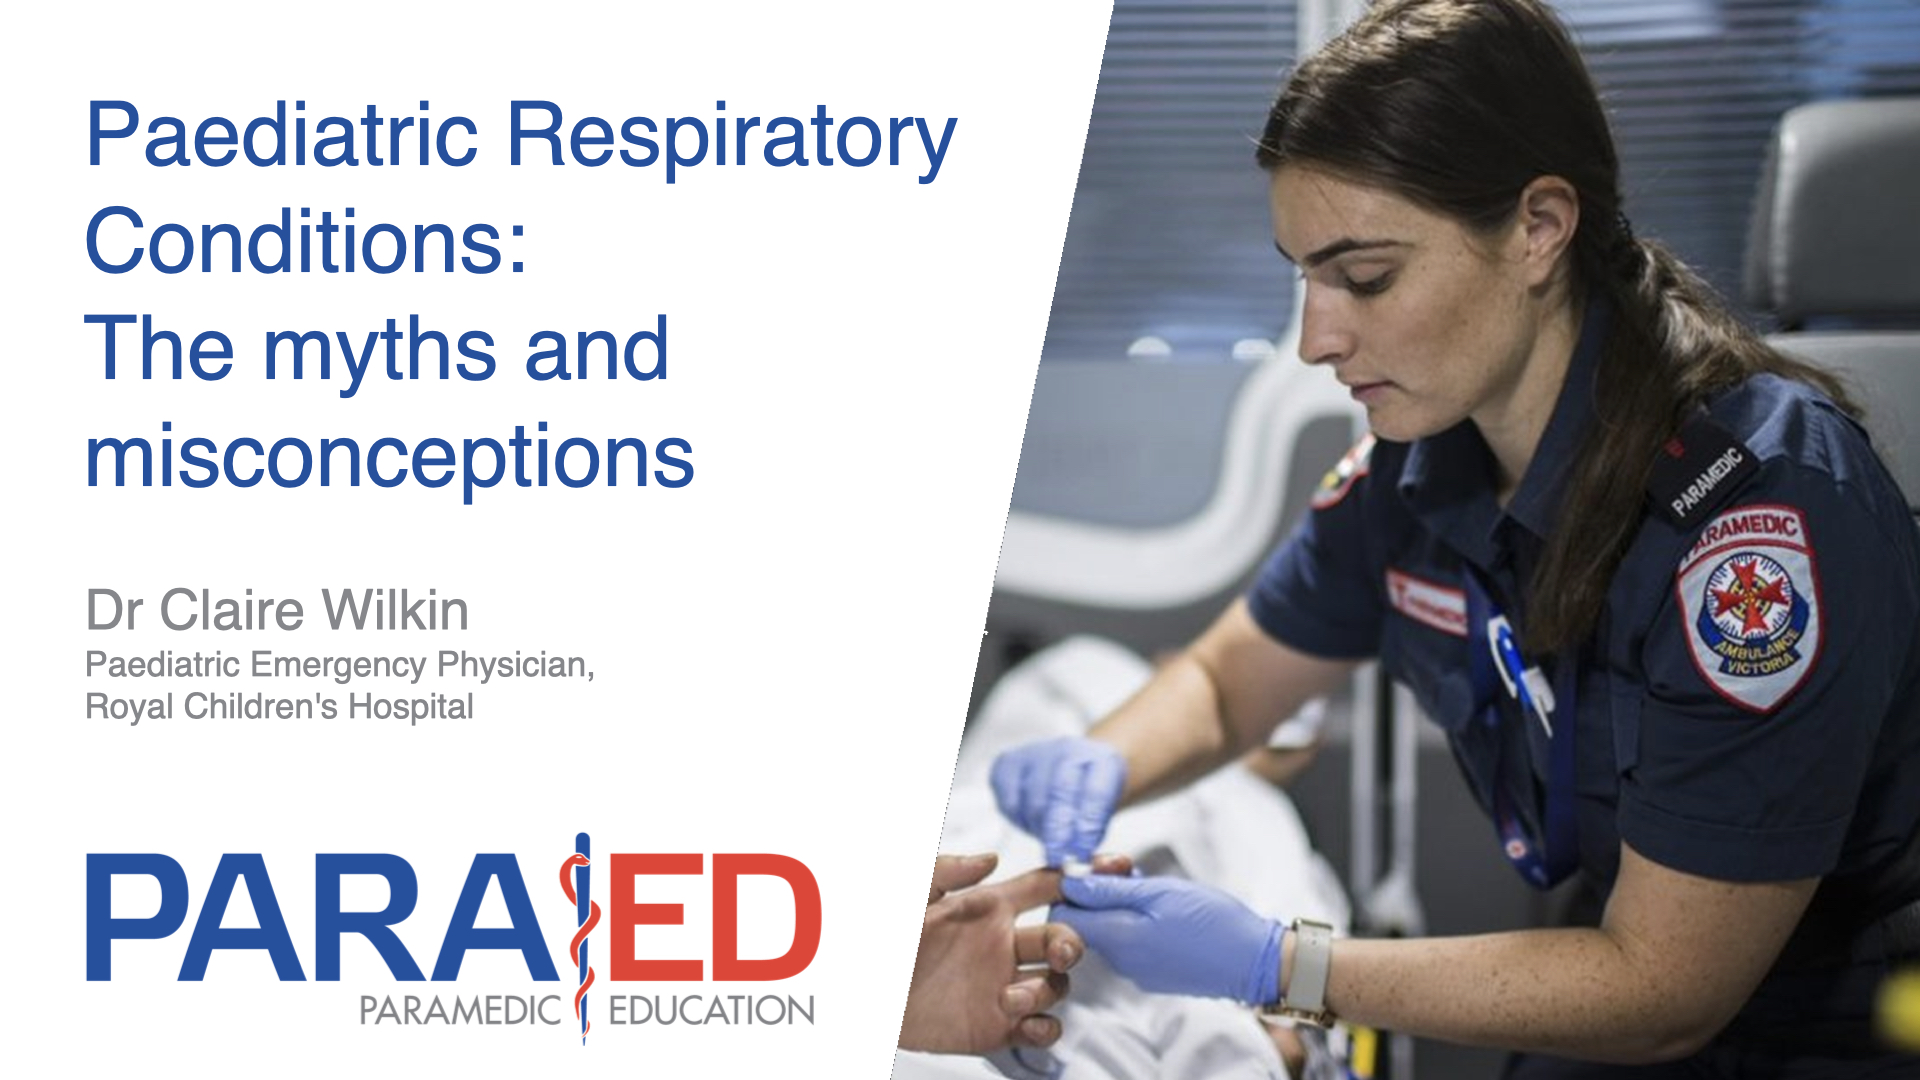 Paediatric Respiratory Conditions: The myths and misconceptions